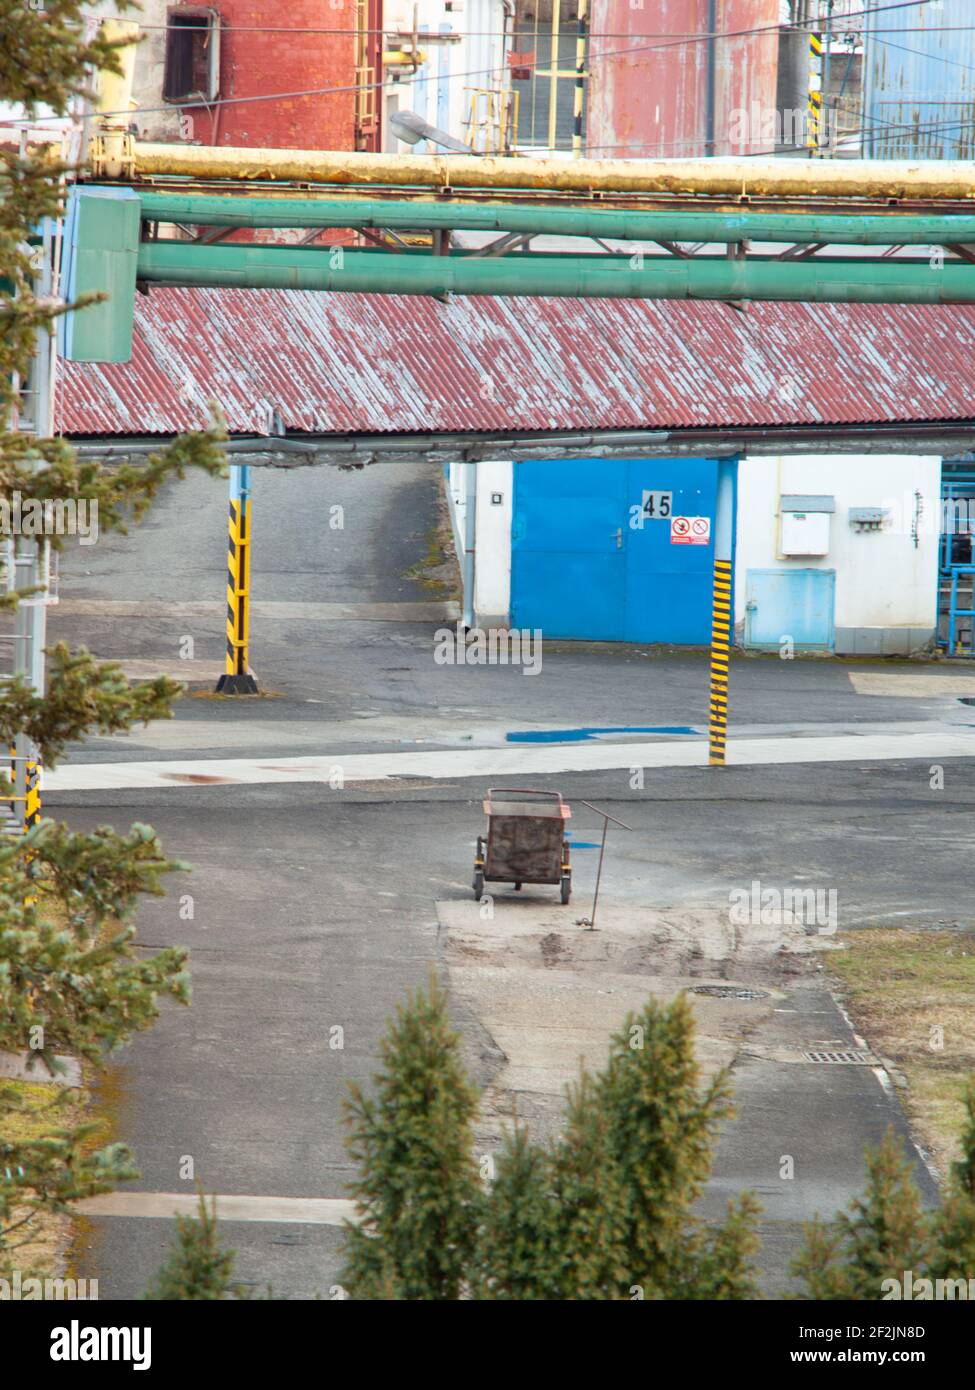 Yard of an old factory, a cart is abandoned in the middle, the company seems to be abandoned. Stock Photo